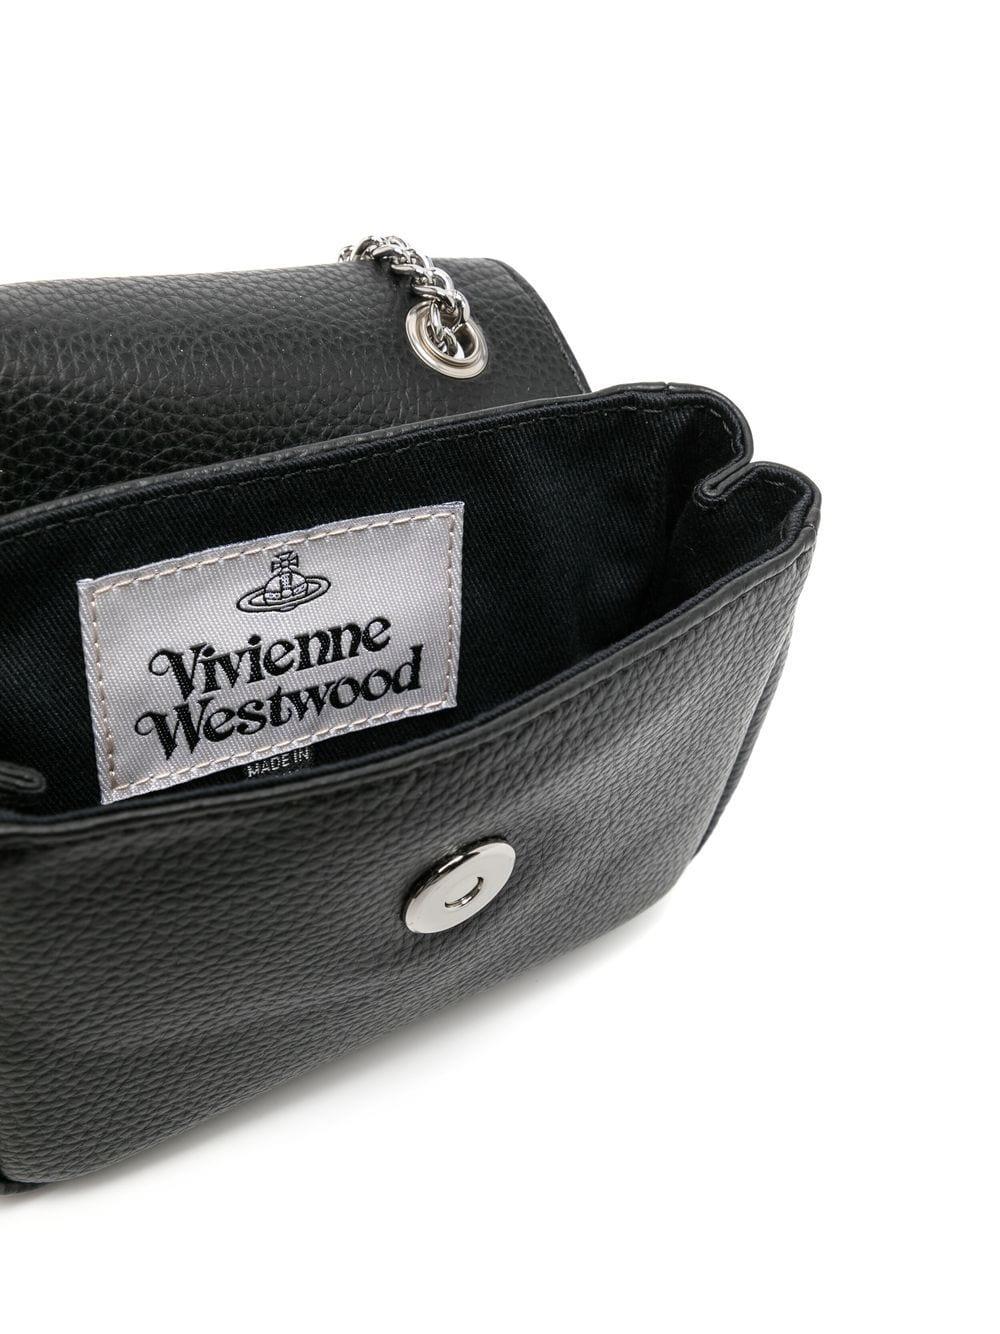 Vivienne Westwood Small Purse with Chain Bag Leather Black Mini Bag ORB Logo